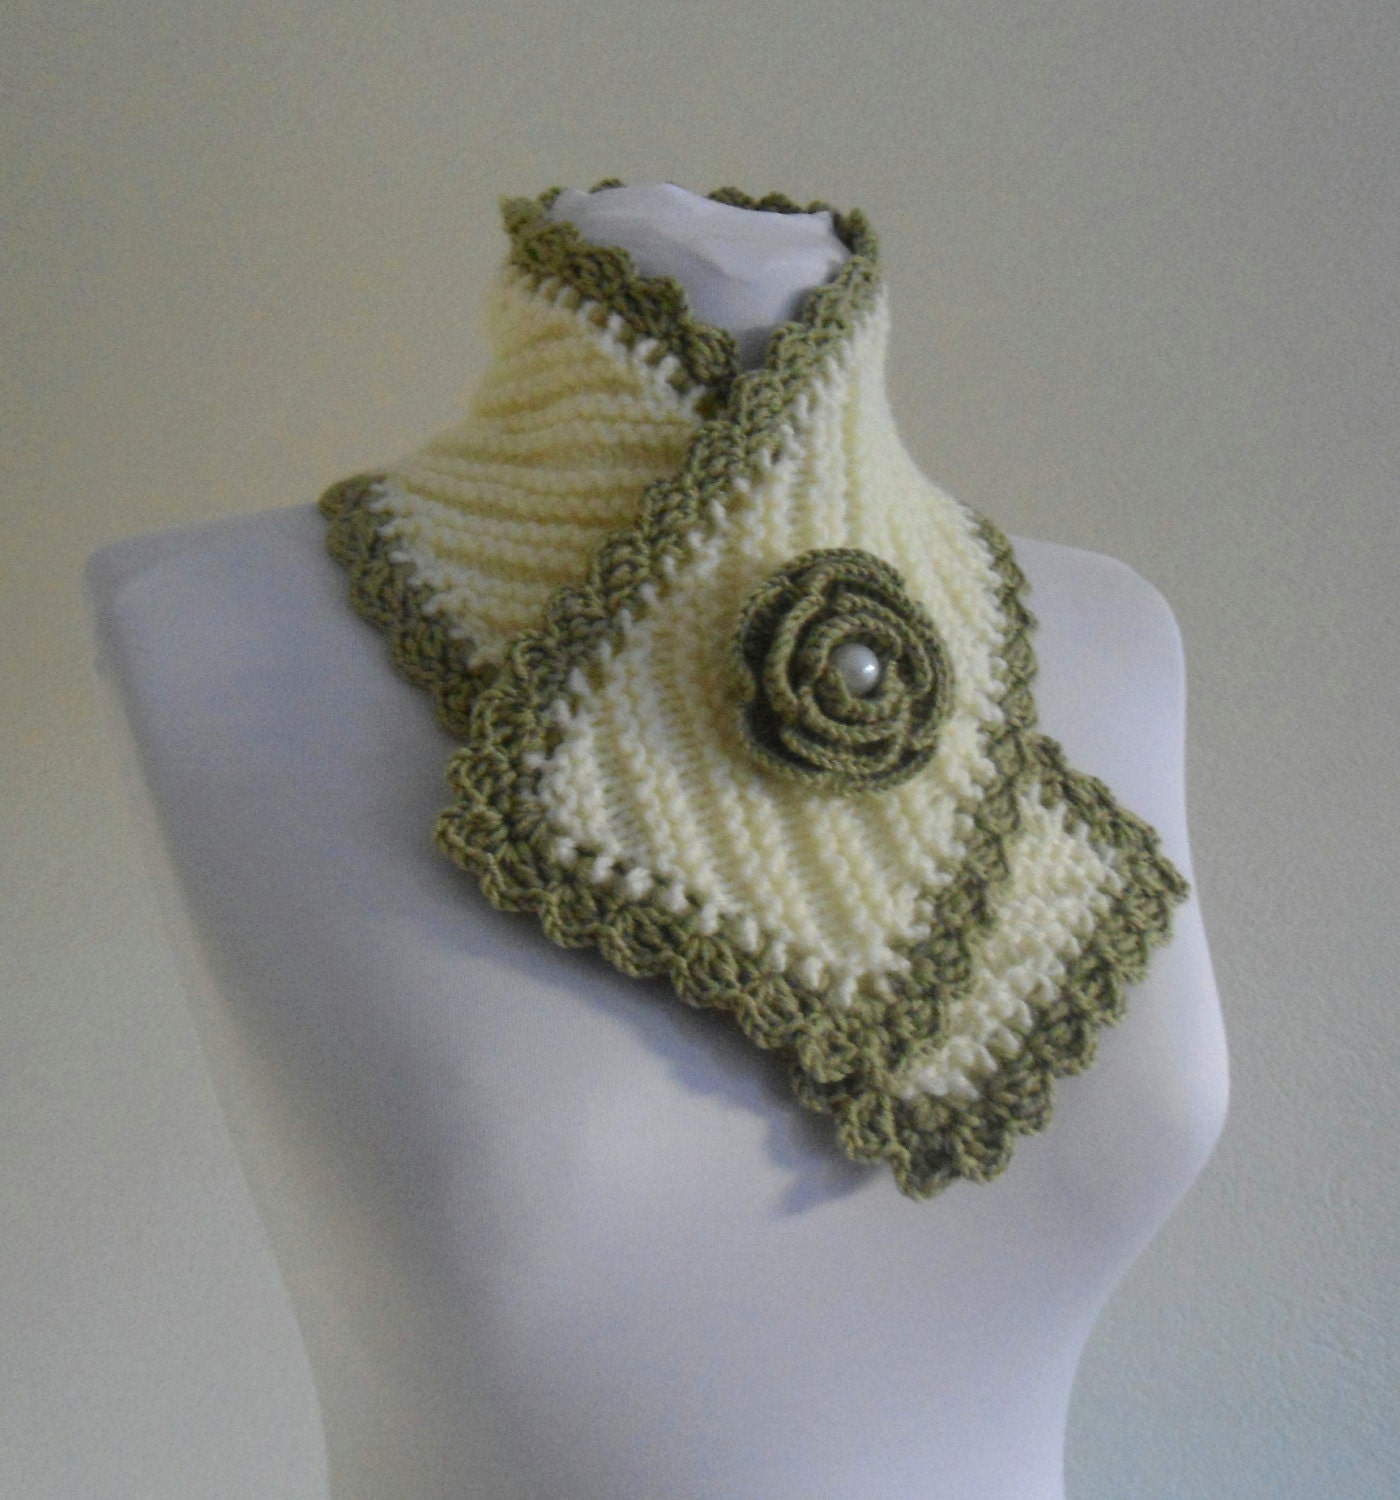 knit collar, Winter fashion, Green and Ivory neckwarmers, hand-knitted, new, Unique gift, 2013